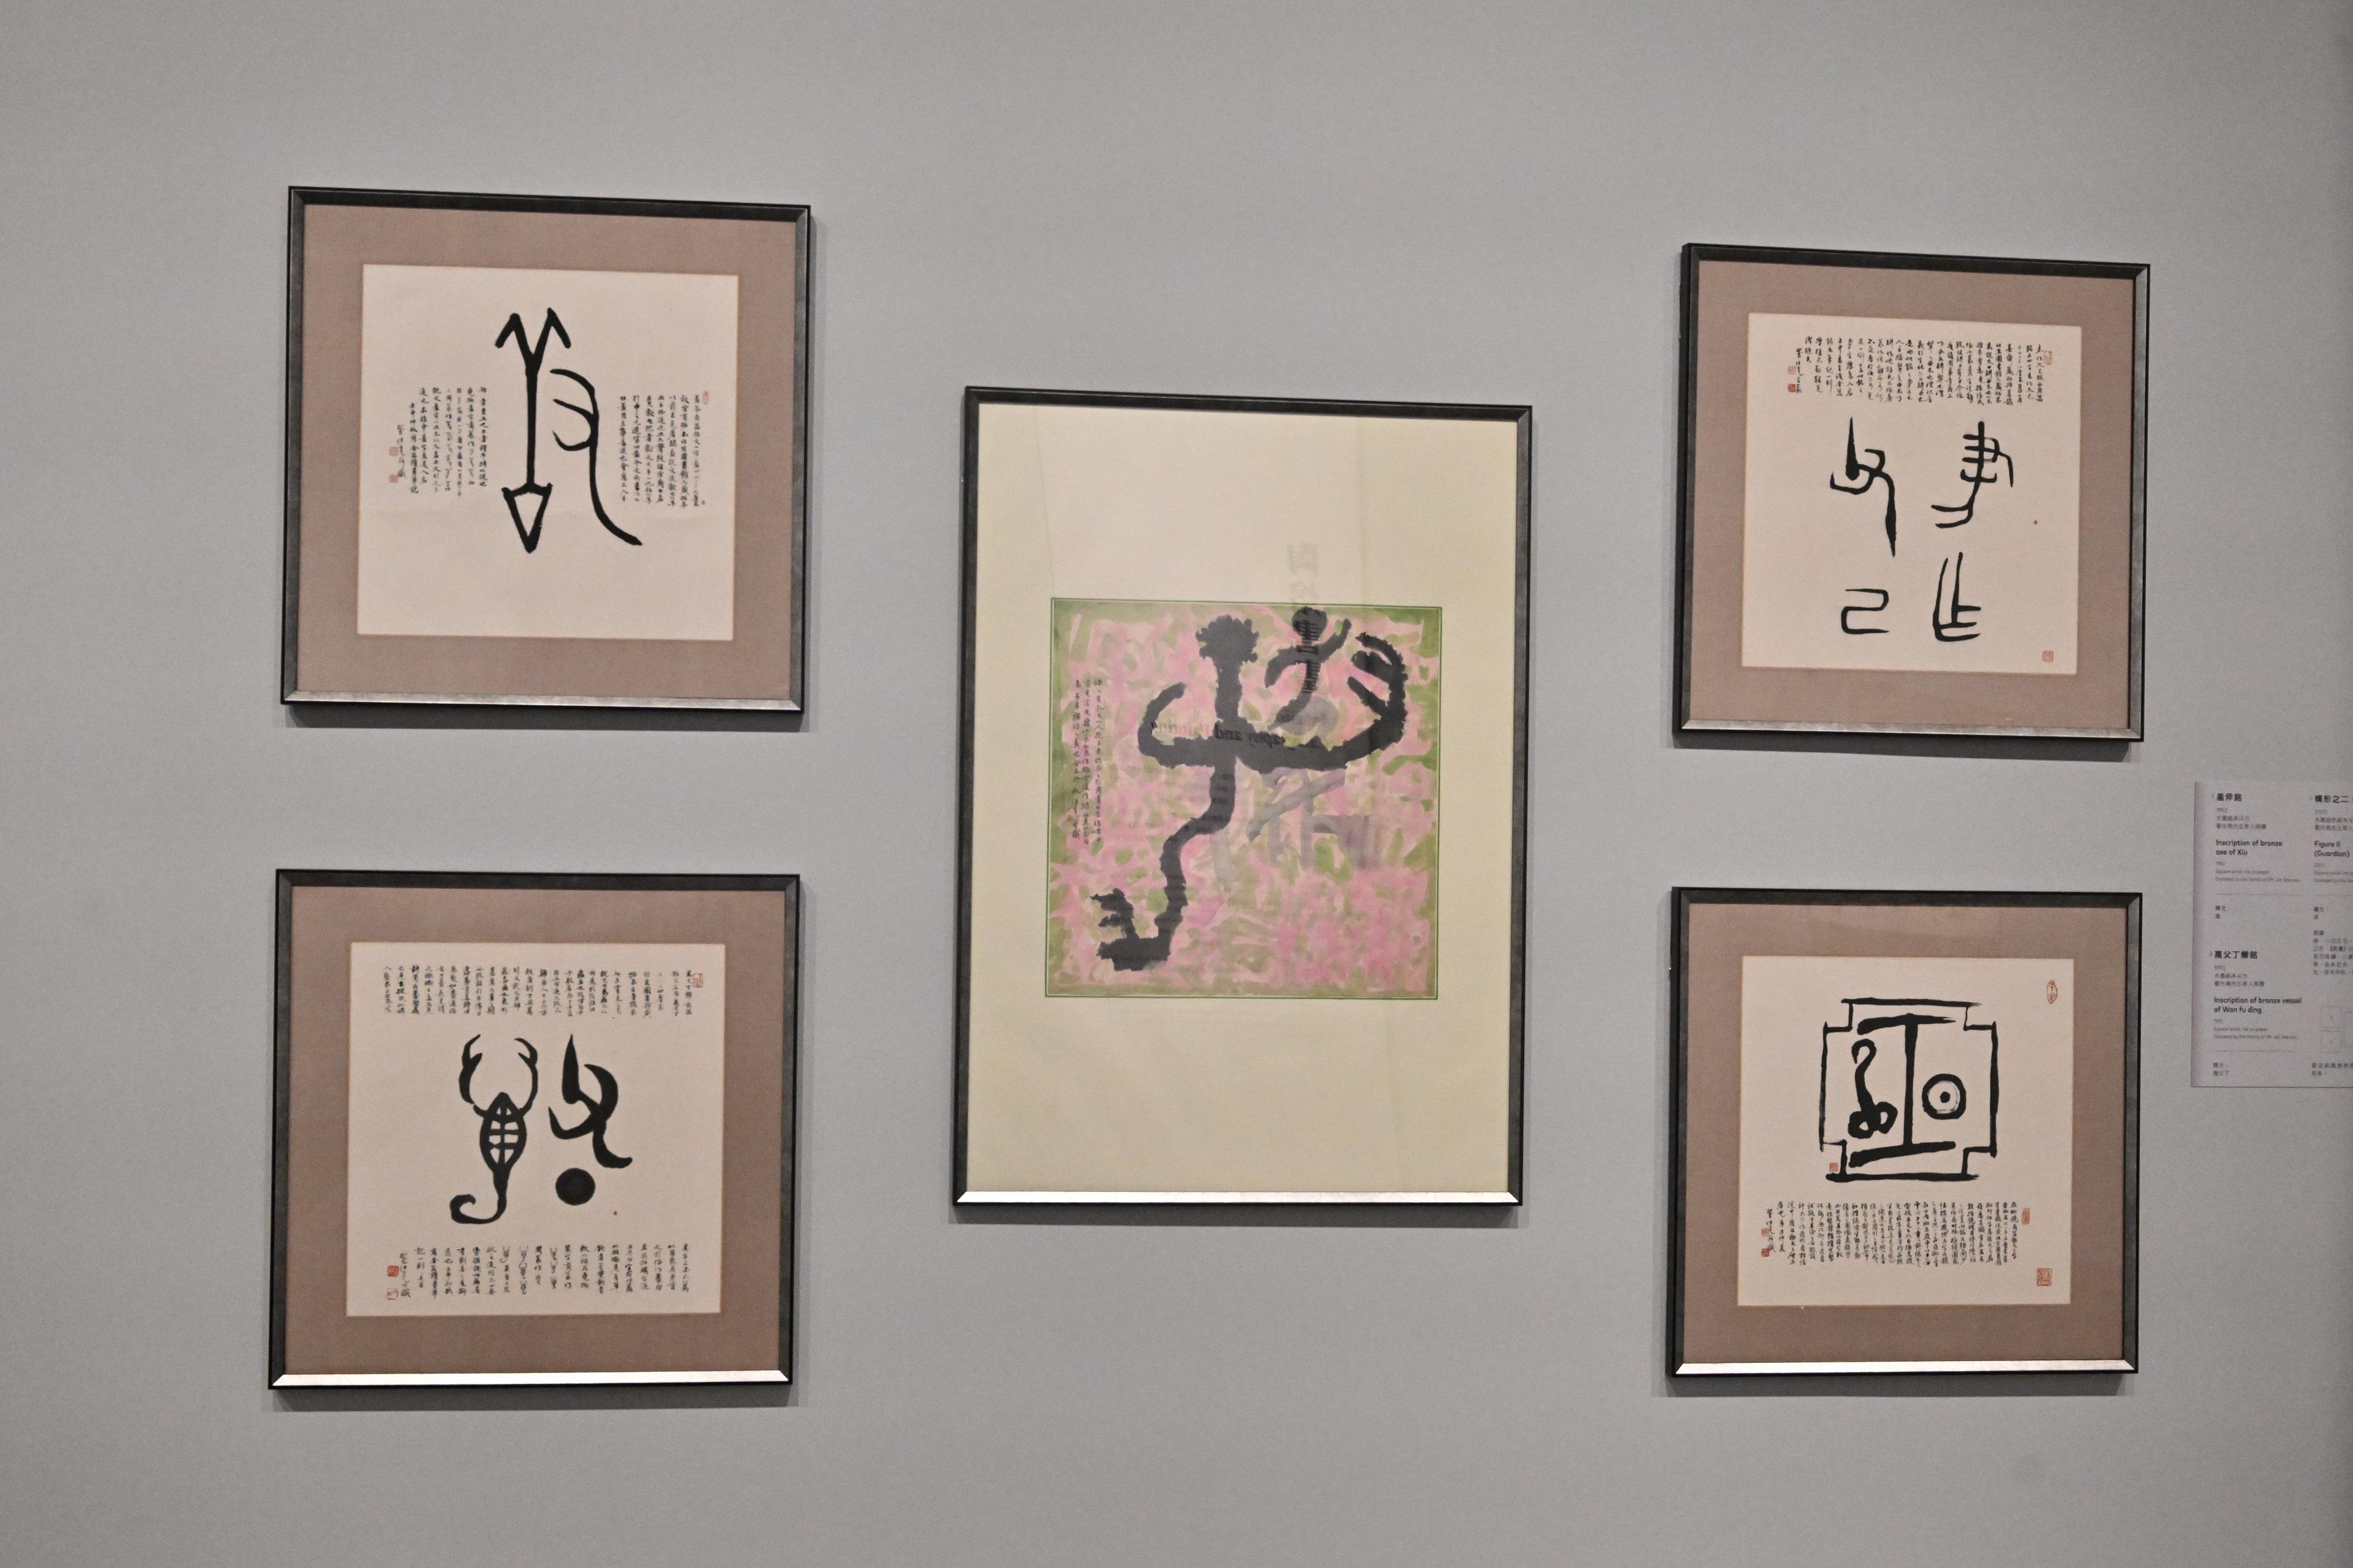 The opening ceremony of the "Boundless Universe: Calligraphy by Jat See-yeu" exhibition and donation ceremony was held today (December 7) at the Hong Kong Museum of Art. Photo shows Jat See-yeu's works that integrate Chinese calligraphy and paintings infused with his deep knowledge of palaeography.